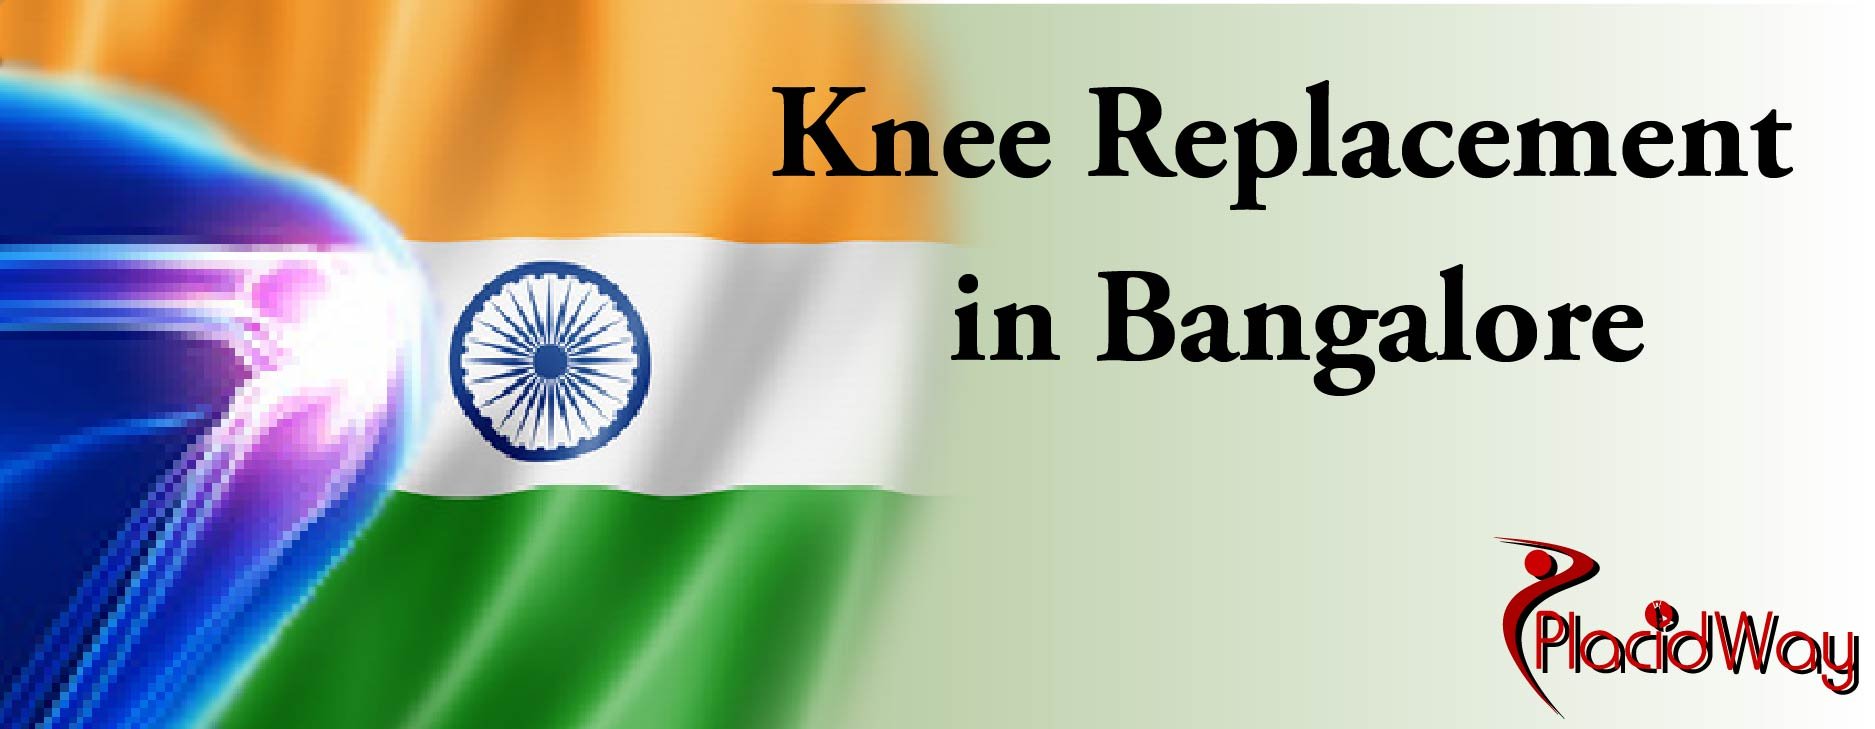 Knee Replacement in Bangalore, Orthopedic Treatment in India